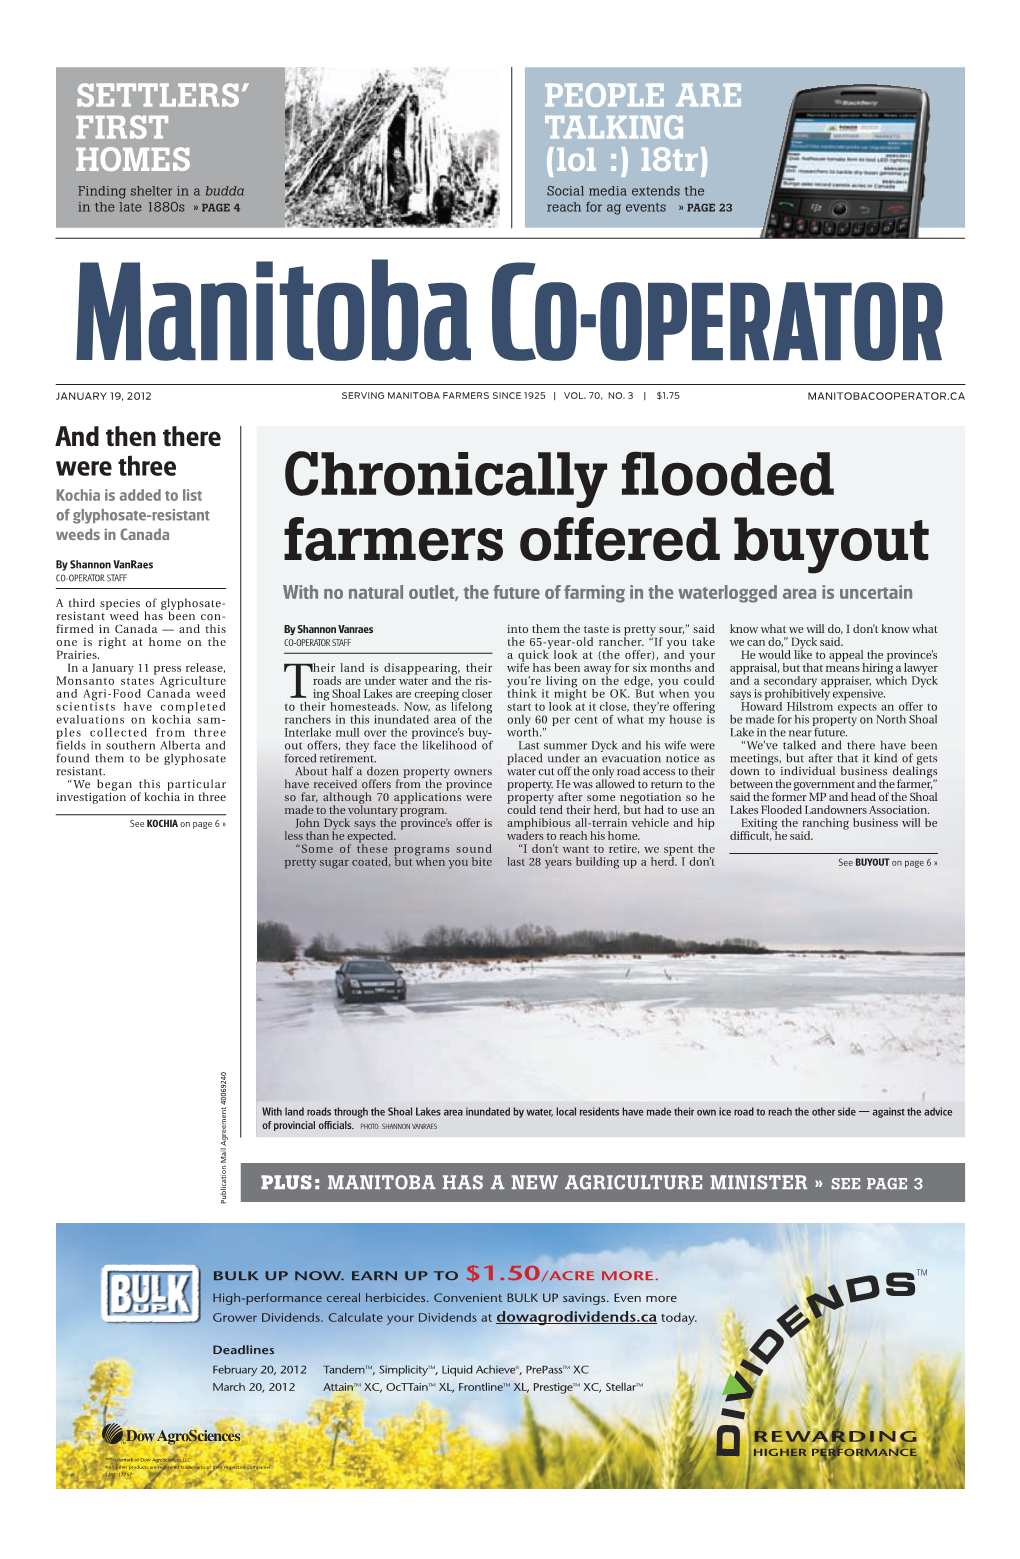 Chronically Flooded Farmers Offered Buyout